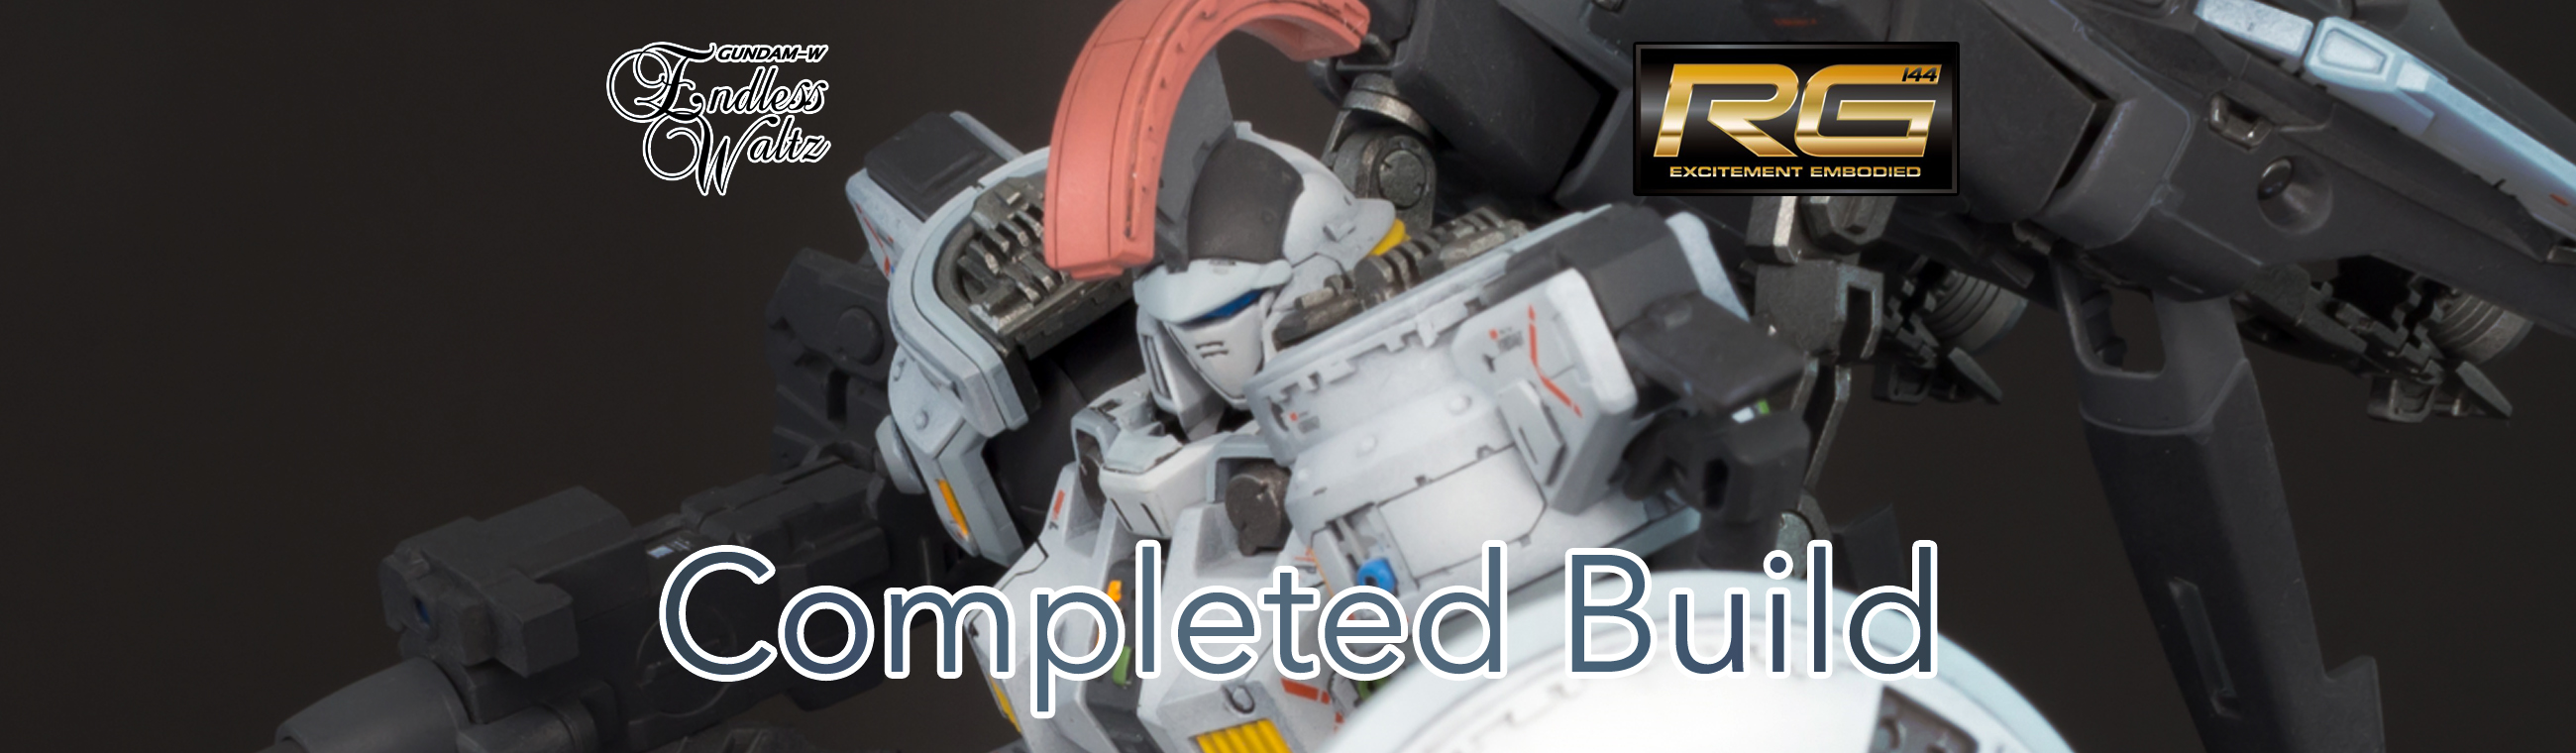 real grade tallgeese completed build banner